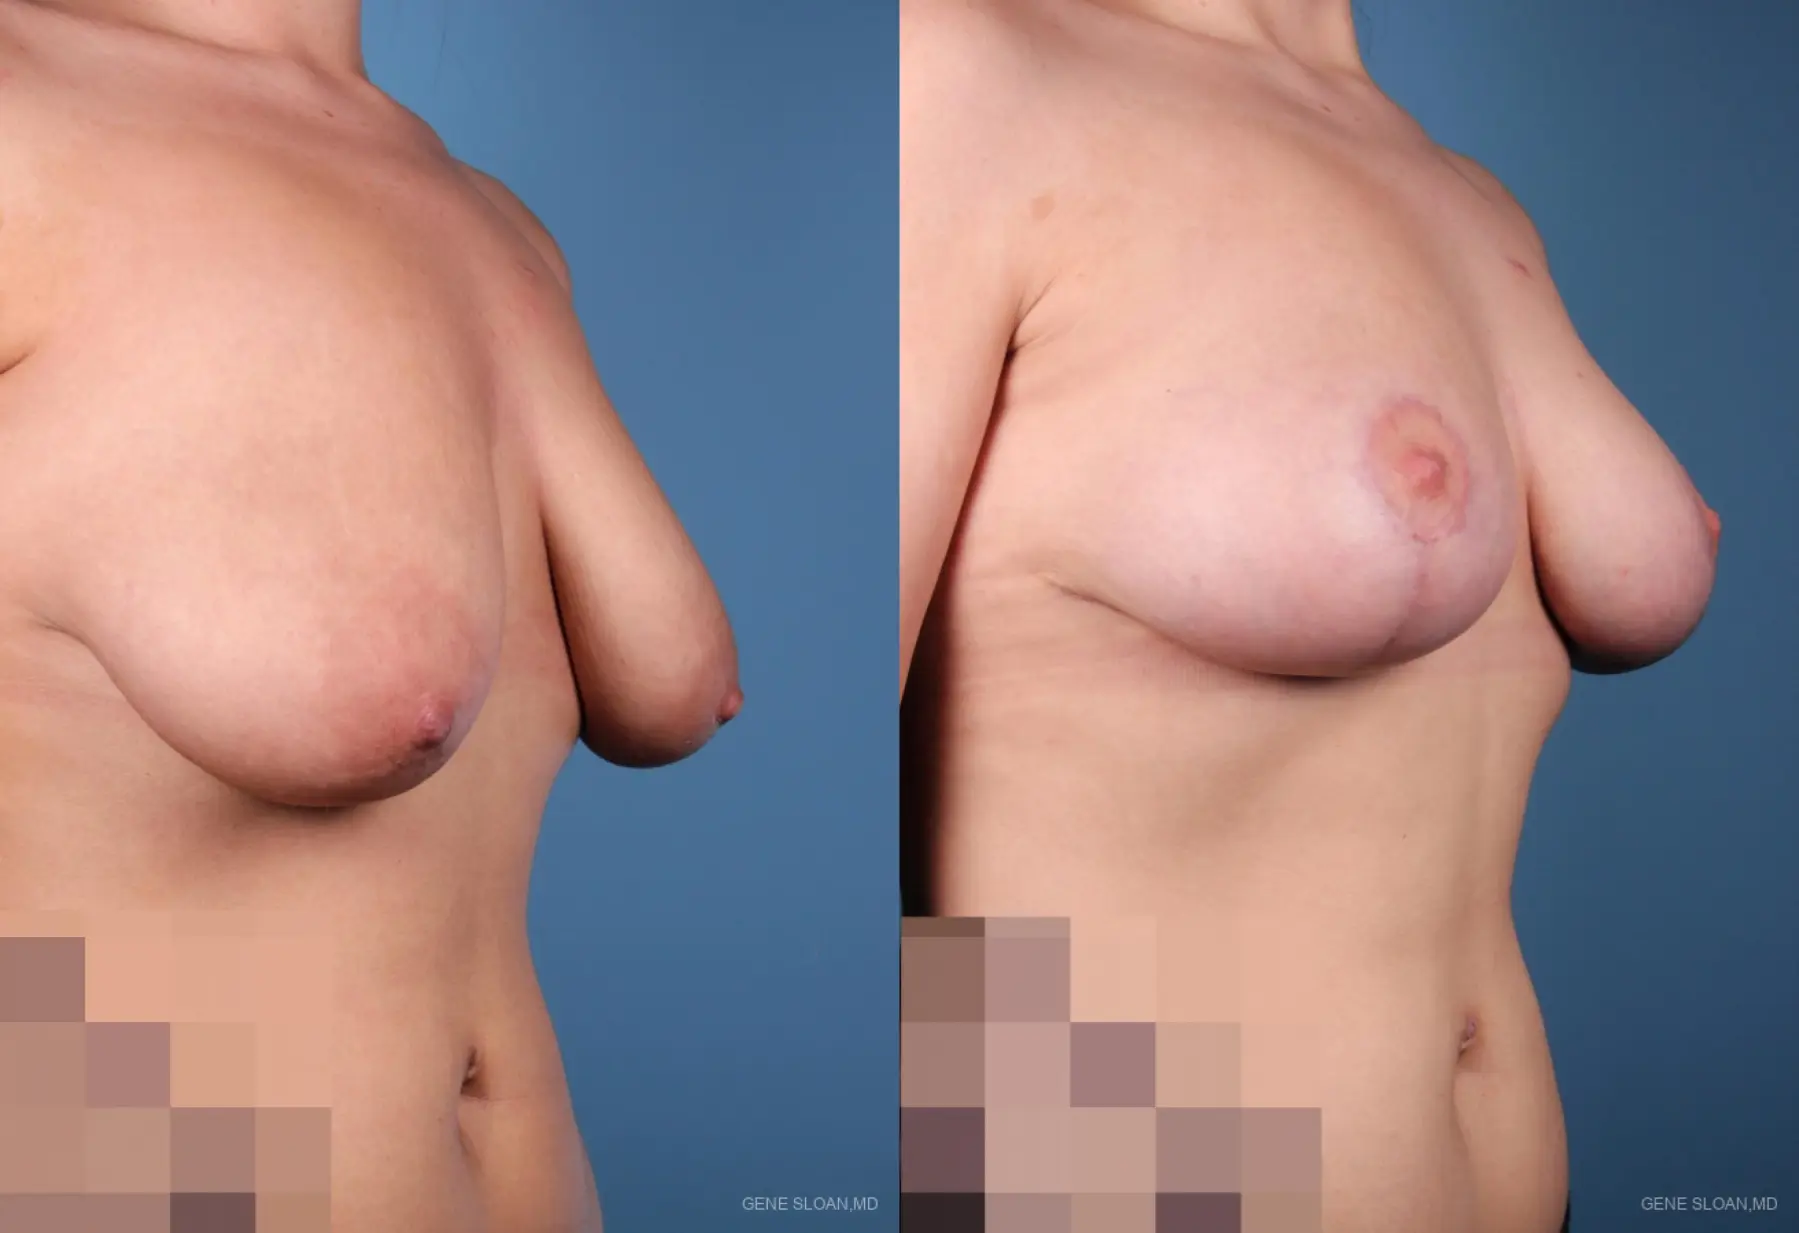 Breast Lift: Patient 1 - Before and After 2